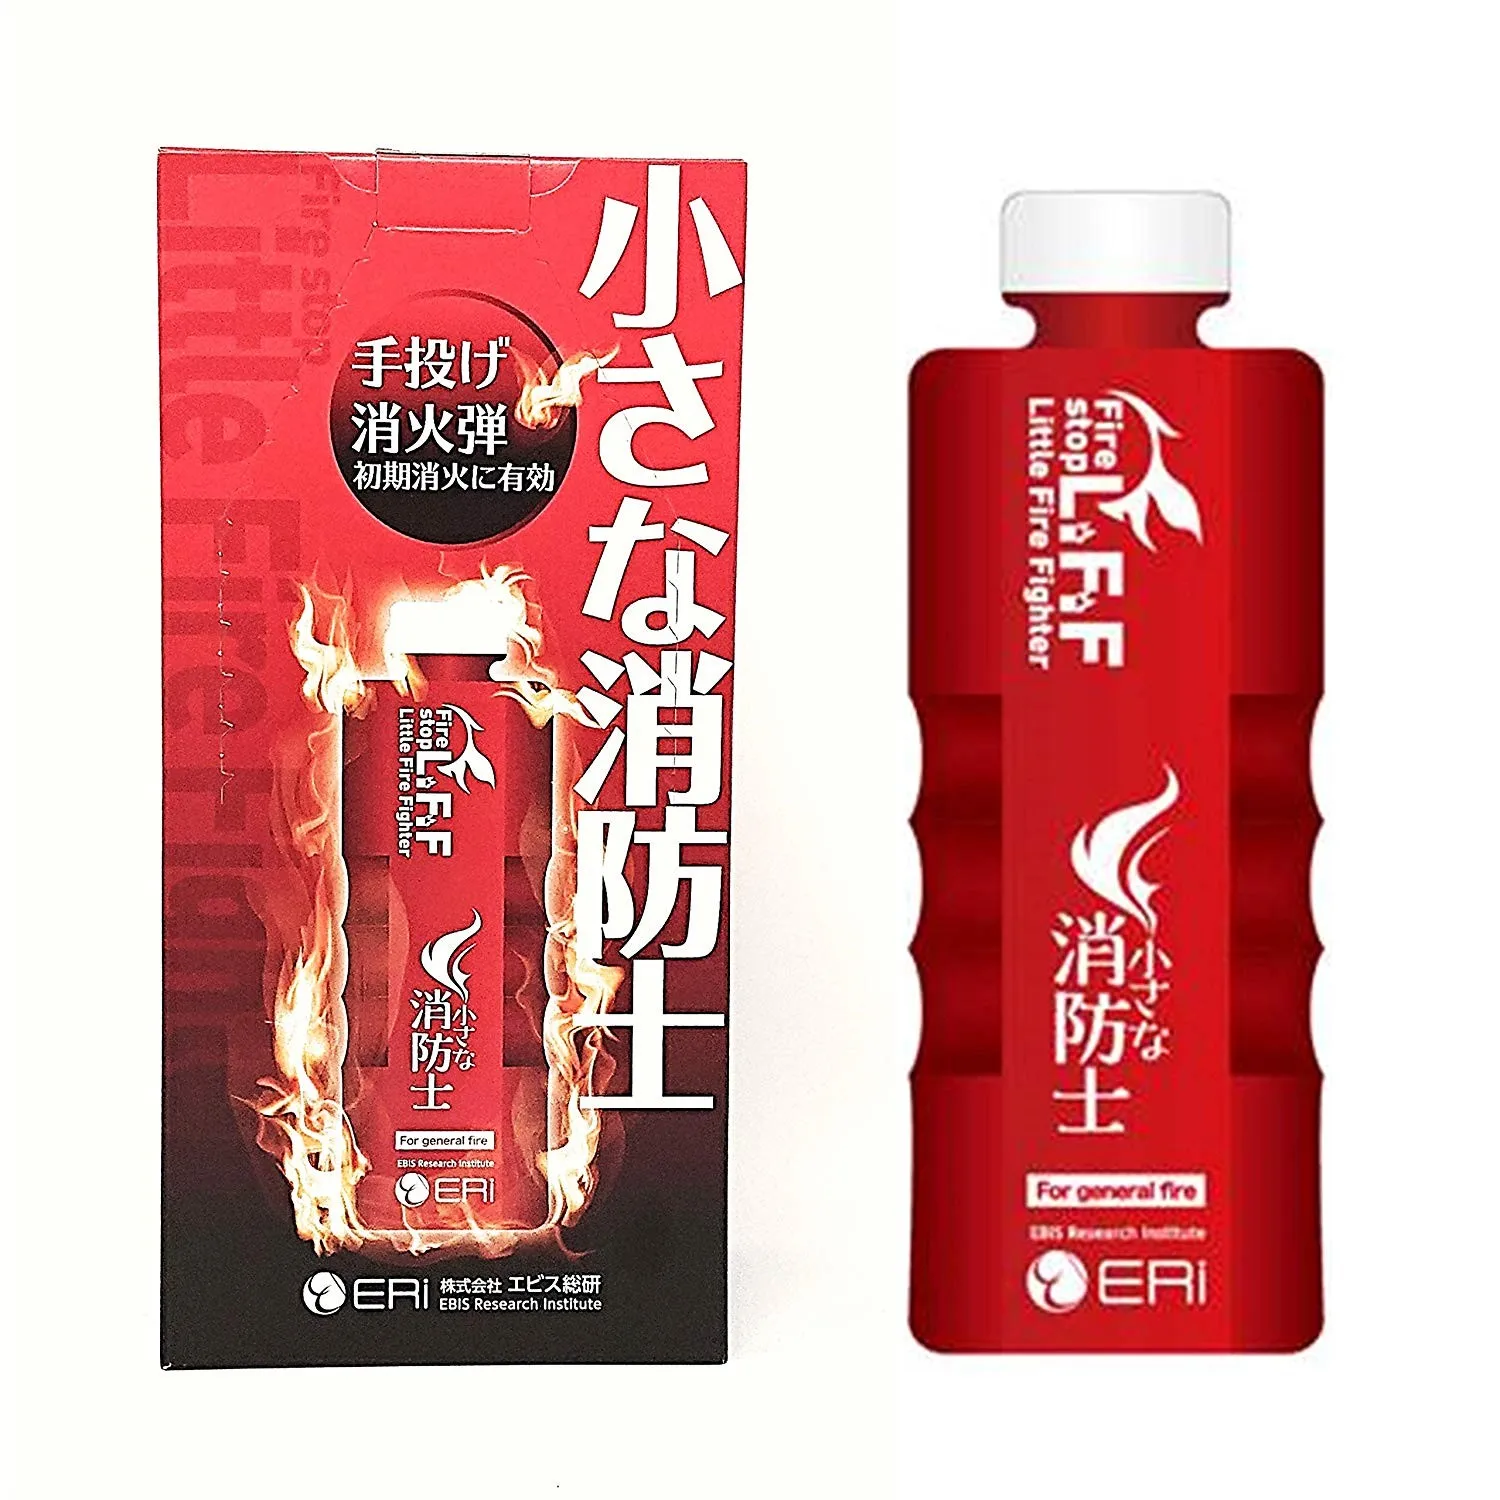 A product made in Japan that is ideal for initial fire extinguishing.